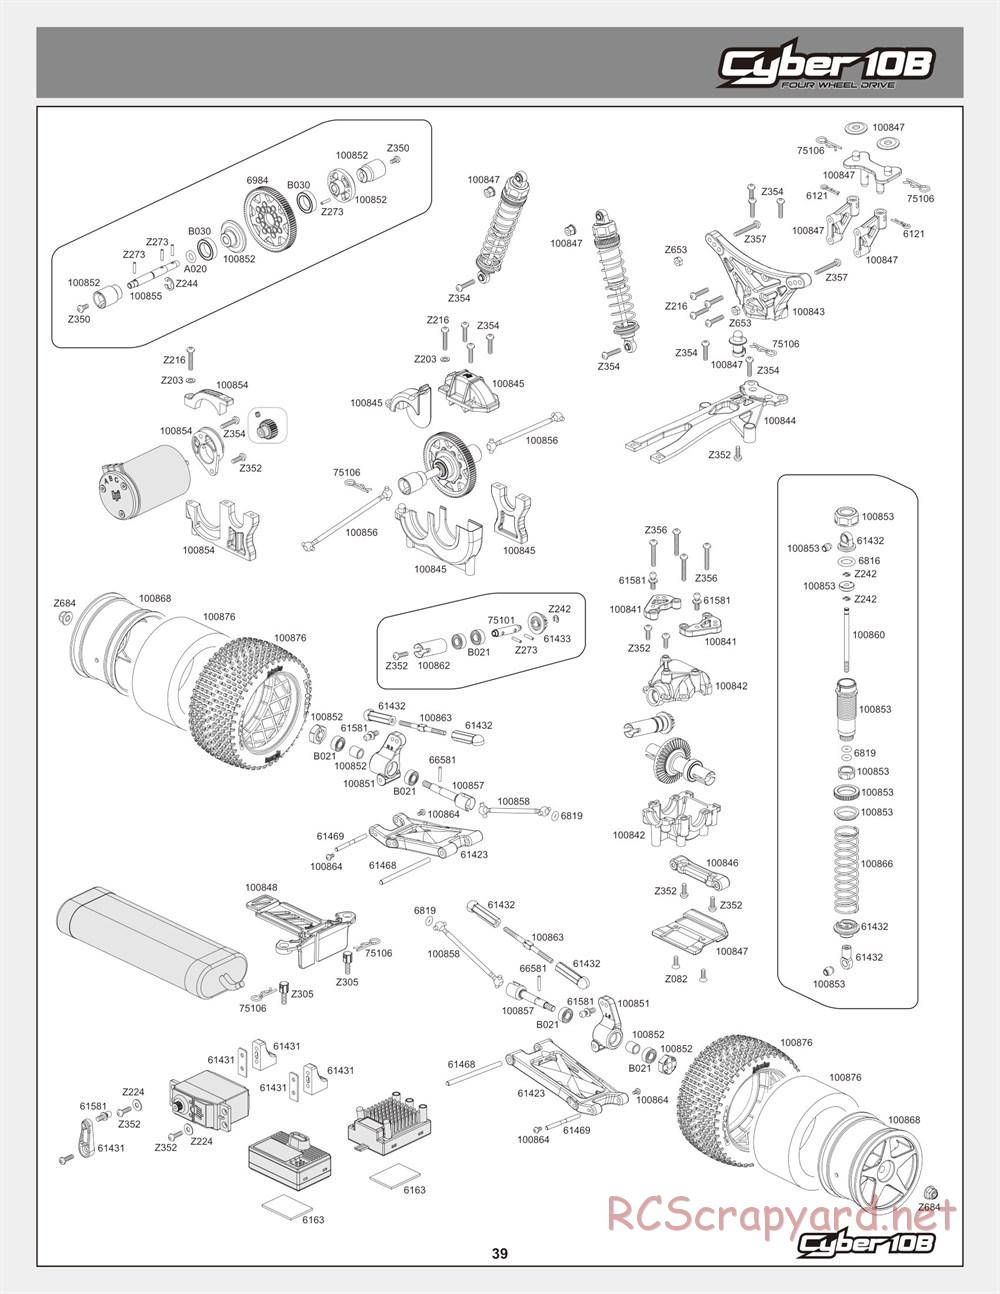 HPI - Cyber 10B - Exploded View - Page 39